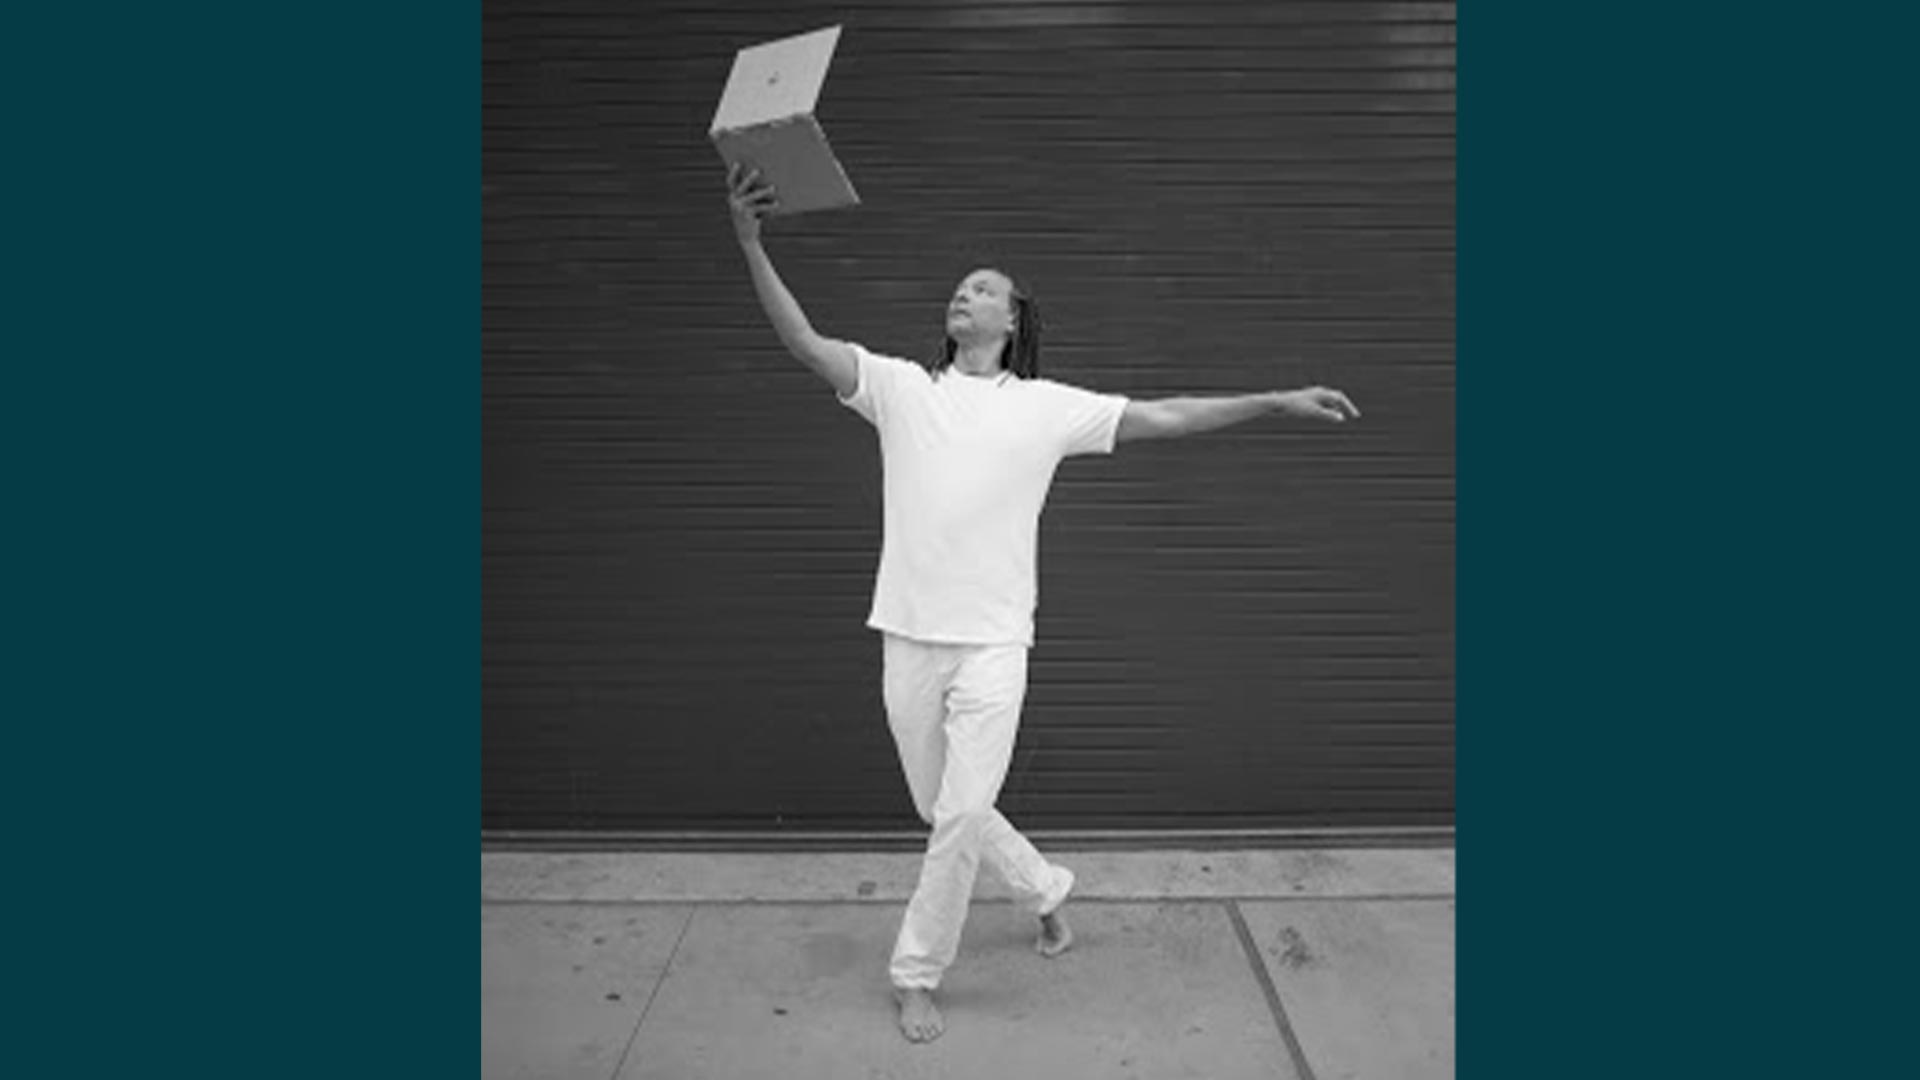 image of Thomas DeFrantz in a dance pose with a laptop in one hand extended above his head